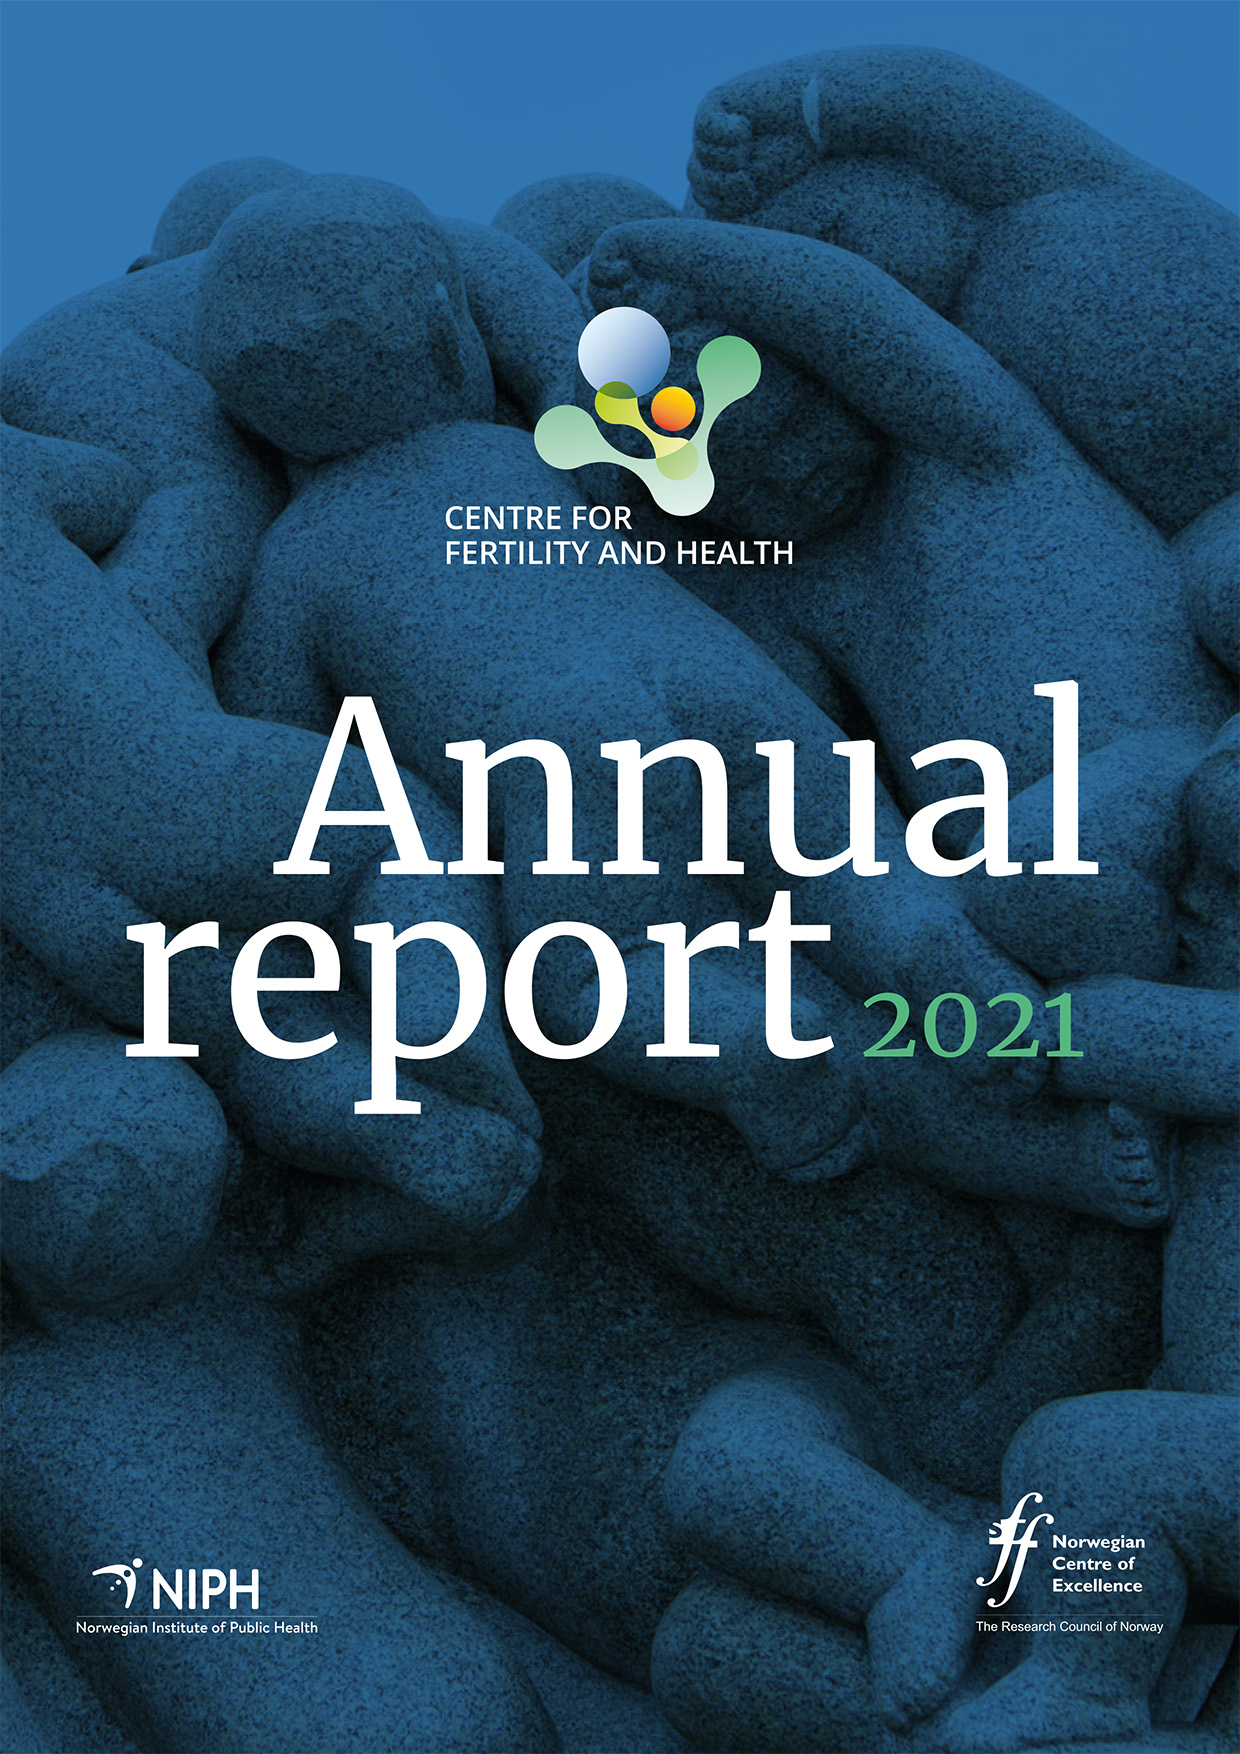 Centre for Fertility and Health Annual Report 2021.jpg